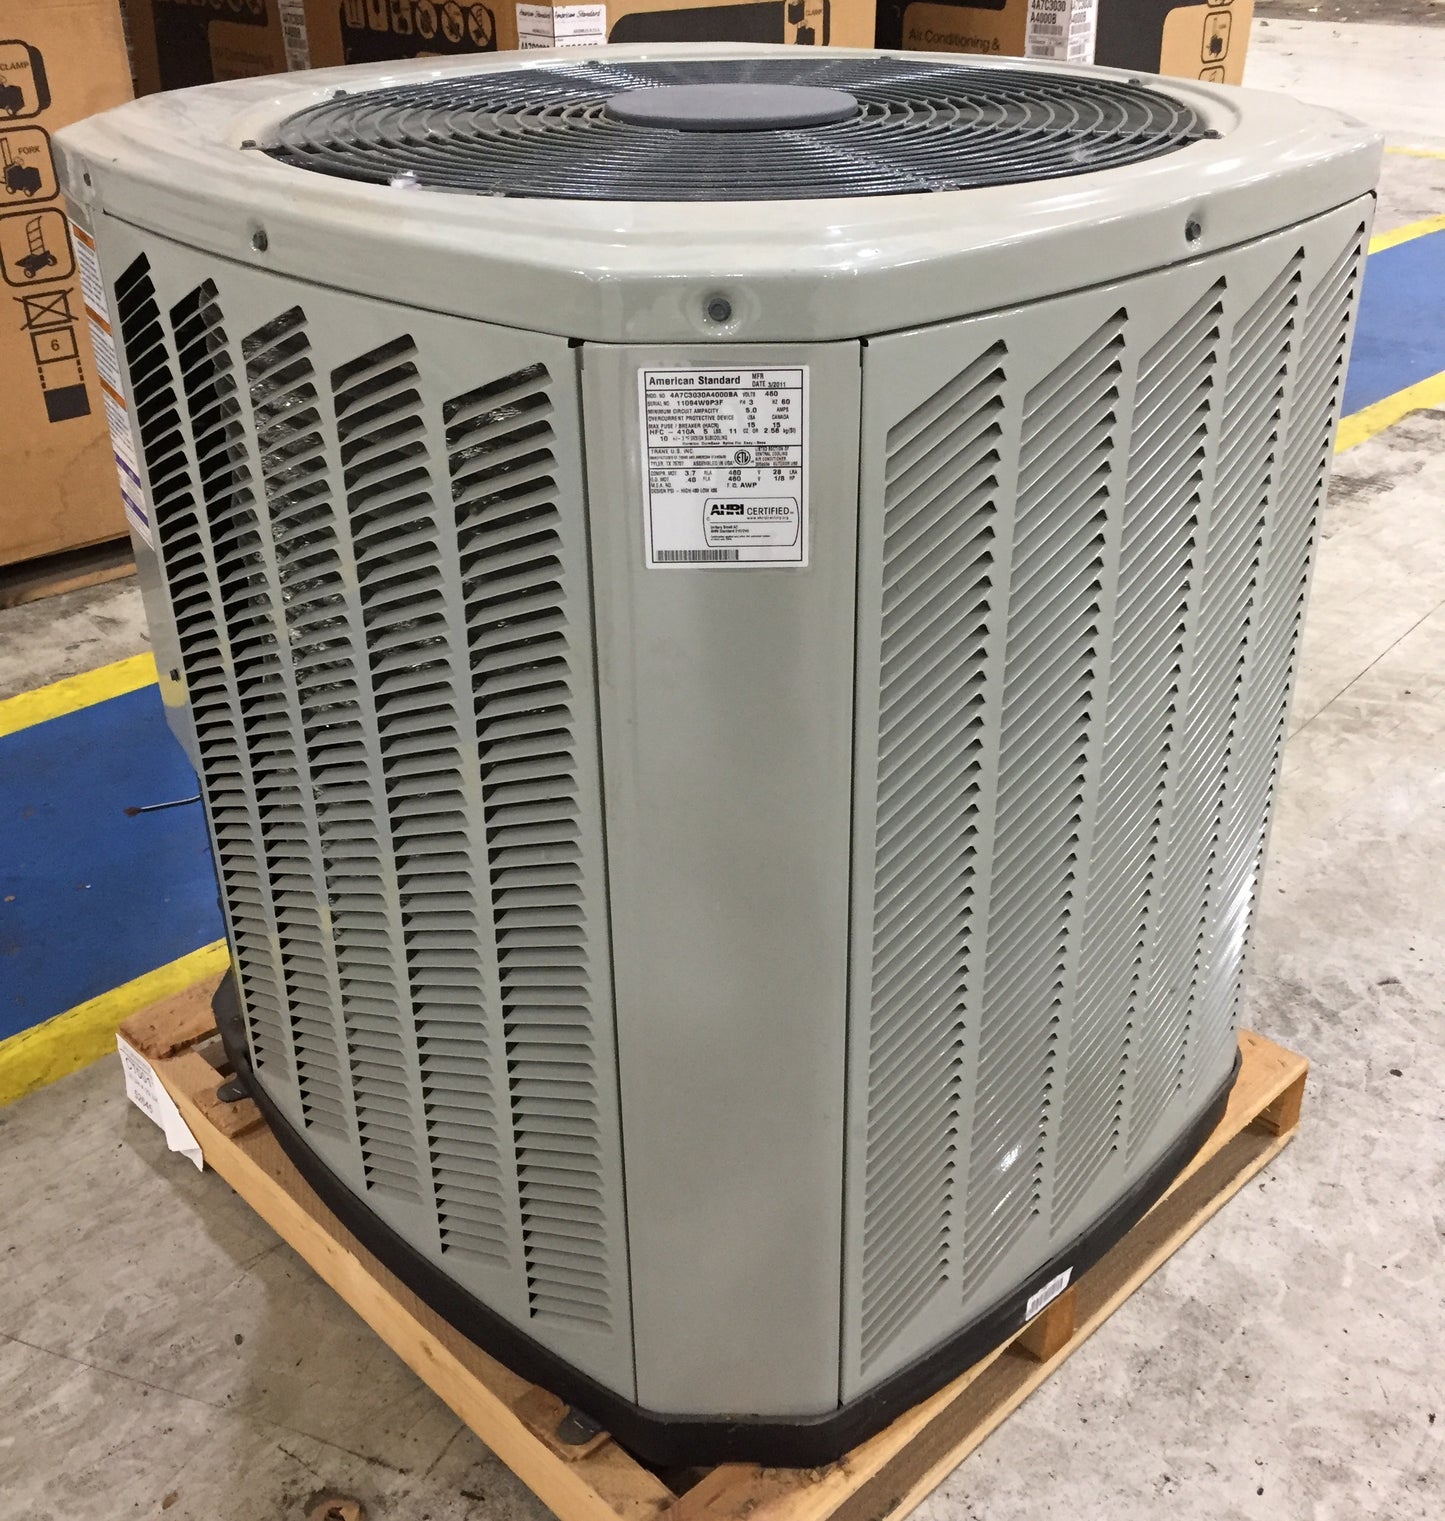 2-1/2 TON SPLIT-SYSTEM AIR CONDITIONER 13 SEER 460/60/3 R-410A